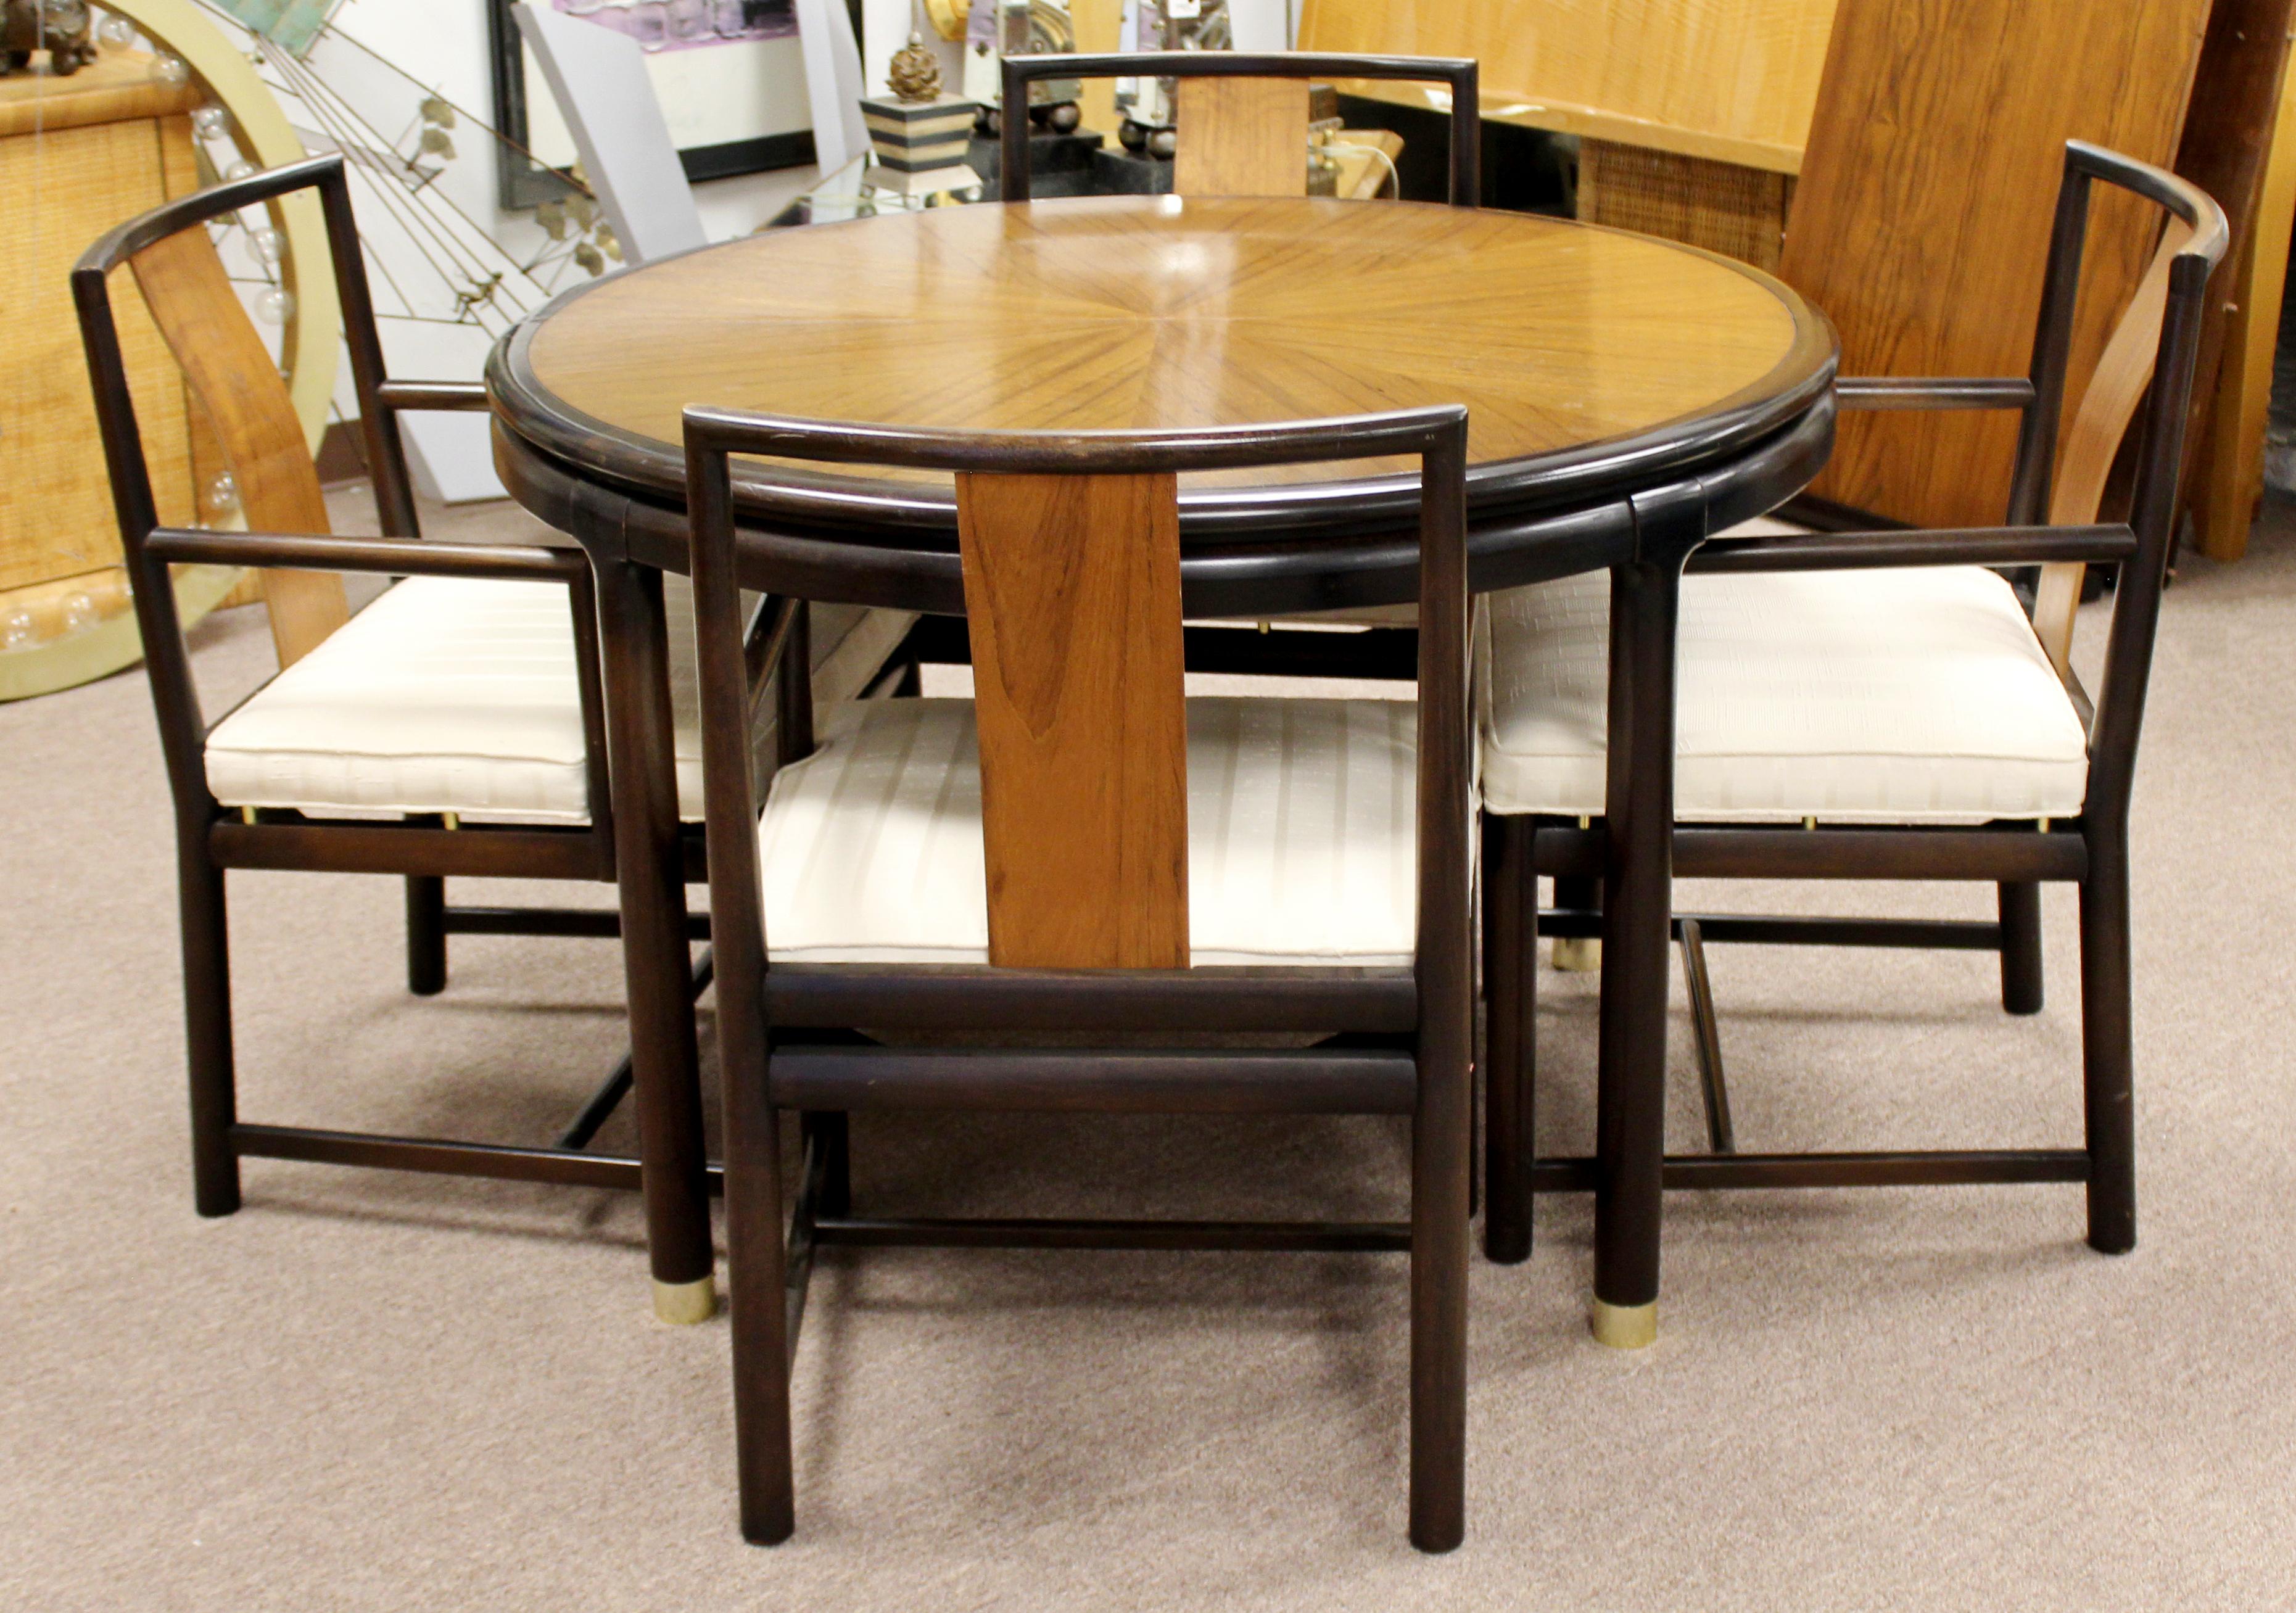 For your consideration is an extraordinary dinette set, including an expandable table with two leaves, and four matching armchairs, attributed to Baker or Dunbar, circa 1960s. In very good vintage condition. The dimensions of the table are 44